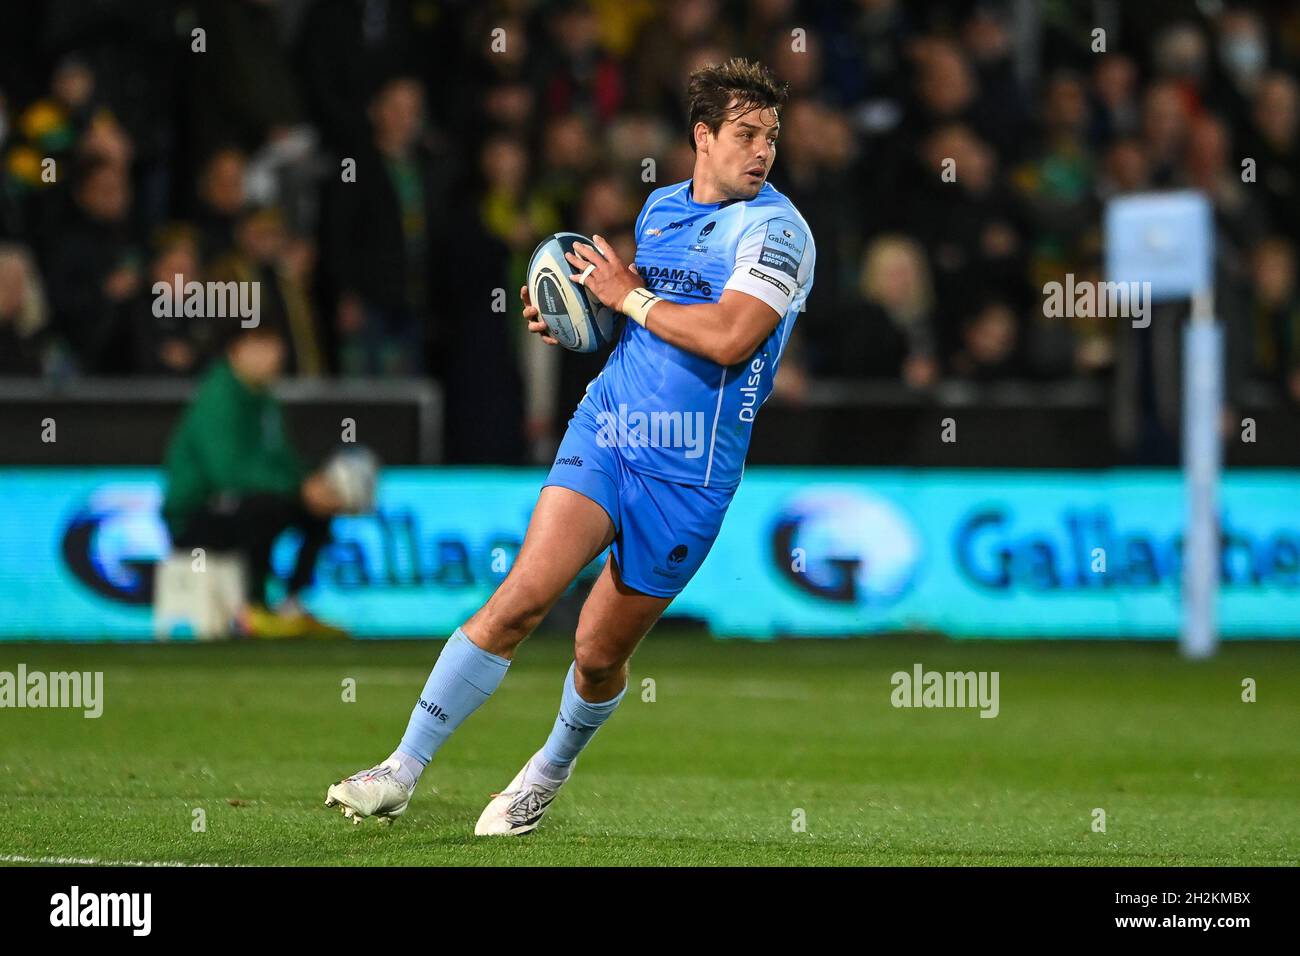 Northampton, UK. 22nd Oct, 2021. Francois Venter of Worcester Warriors in action in, on 10/22/2021. (Photo by Craig Thomas/News Images/Sipa USA) Credit: Sipa USA/Alamy Live News Credit: Sipa USA/Alamy Live News Stock Photo